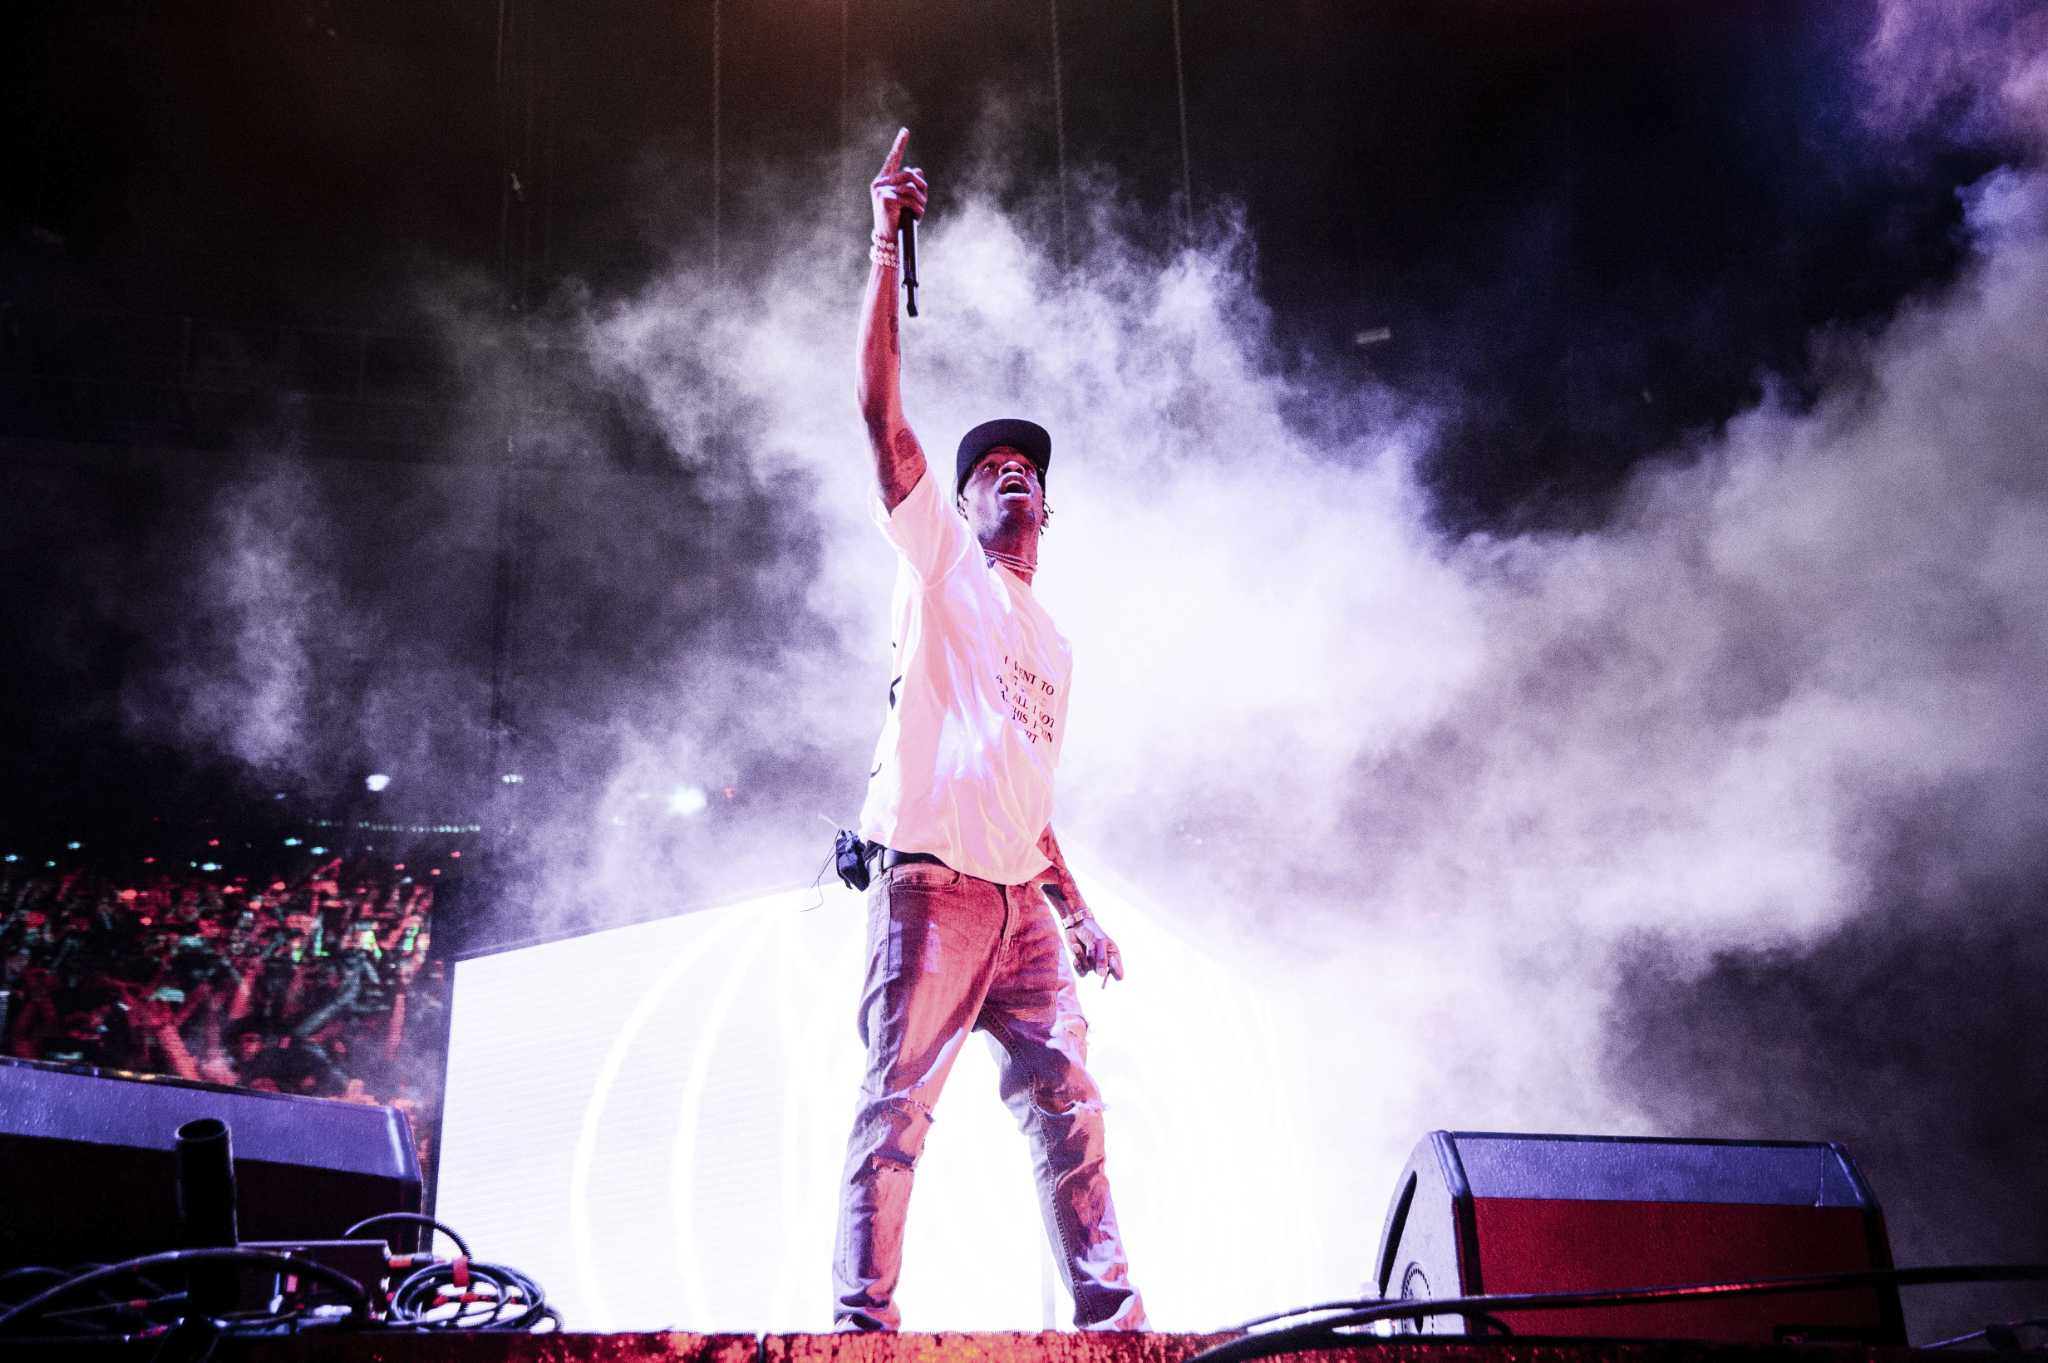 Travis Scott shut out of major categories in Grammy nominations - Houston Chronicle2048 x 1363